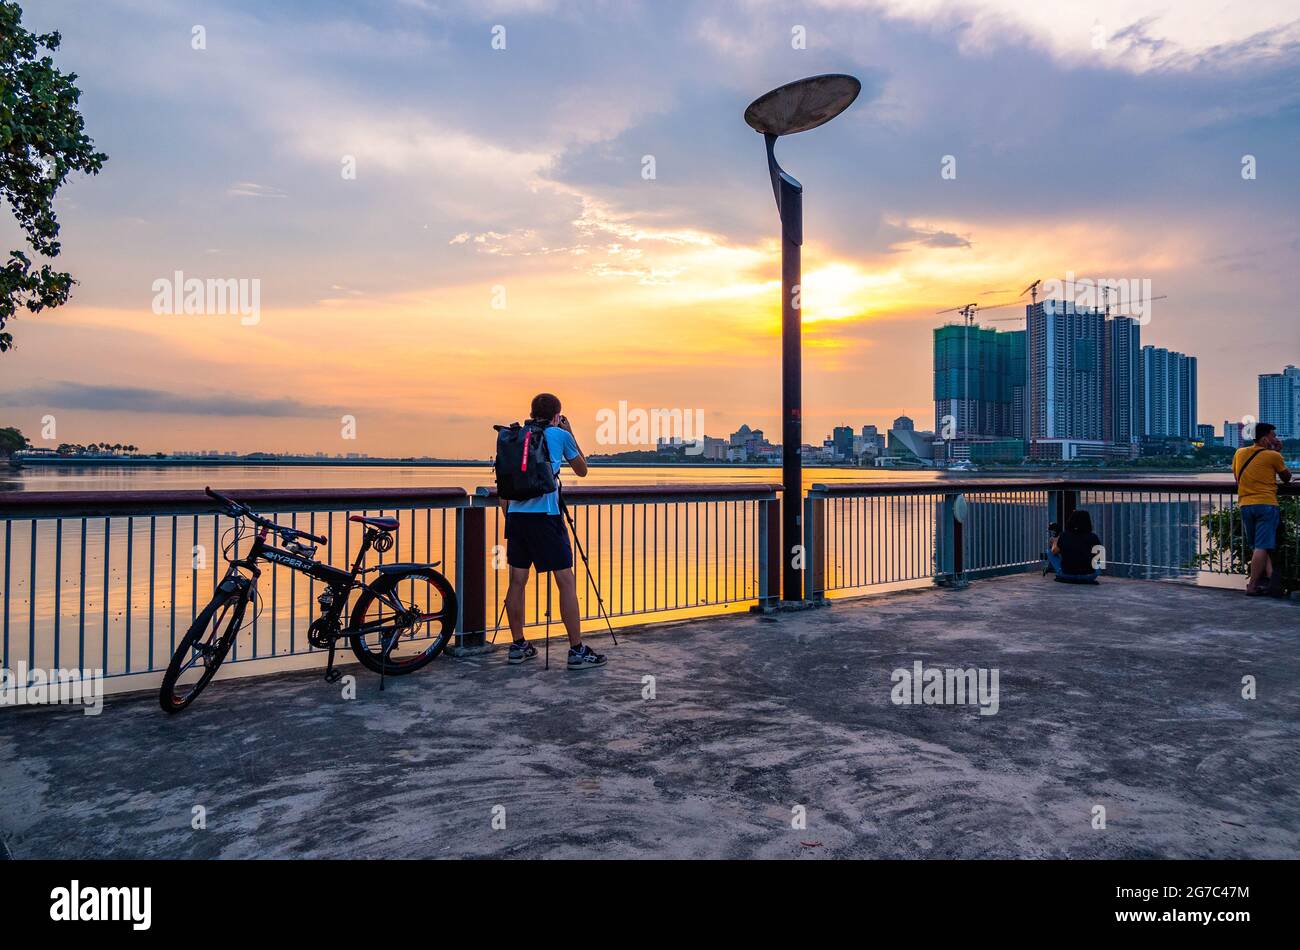 Man photographing sunset at the central coastline of Singapore. Stock Photo